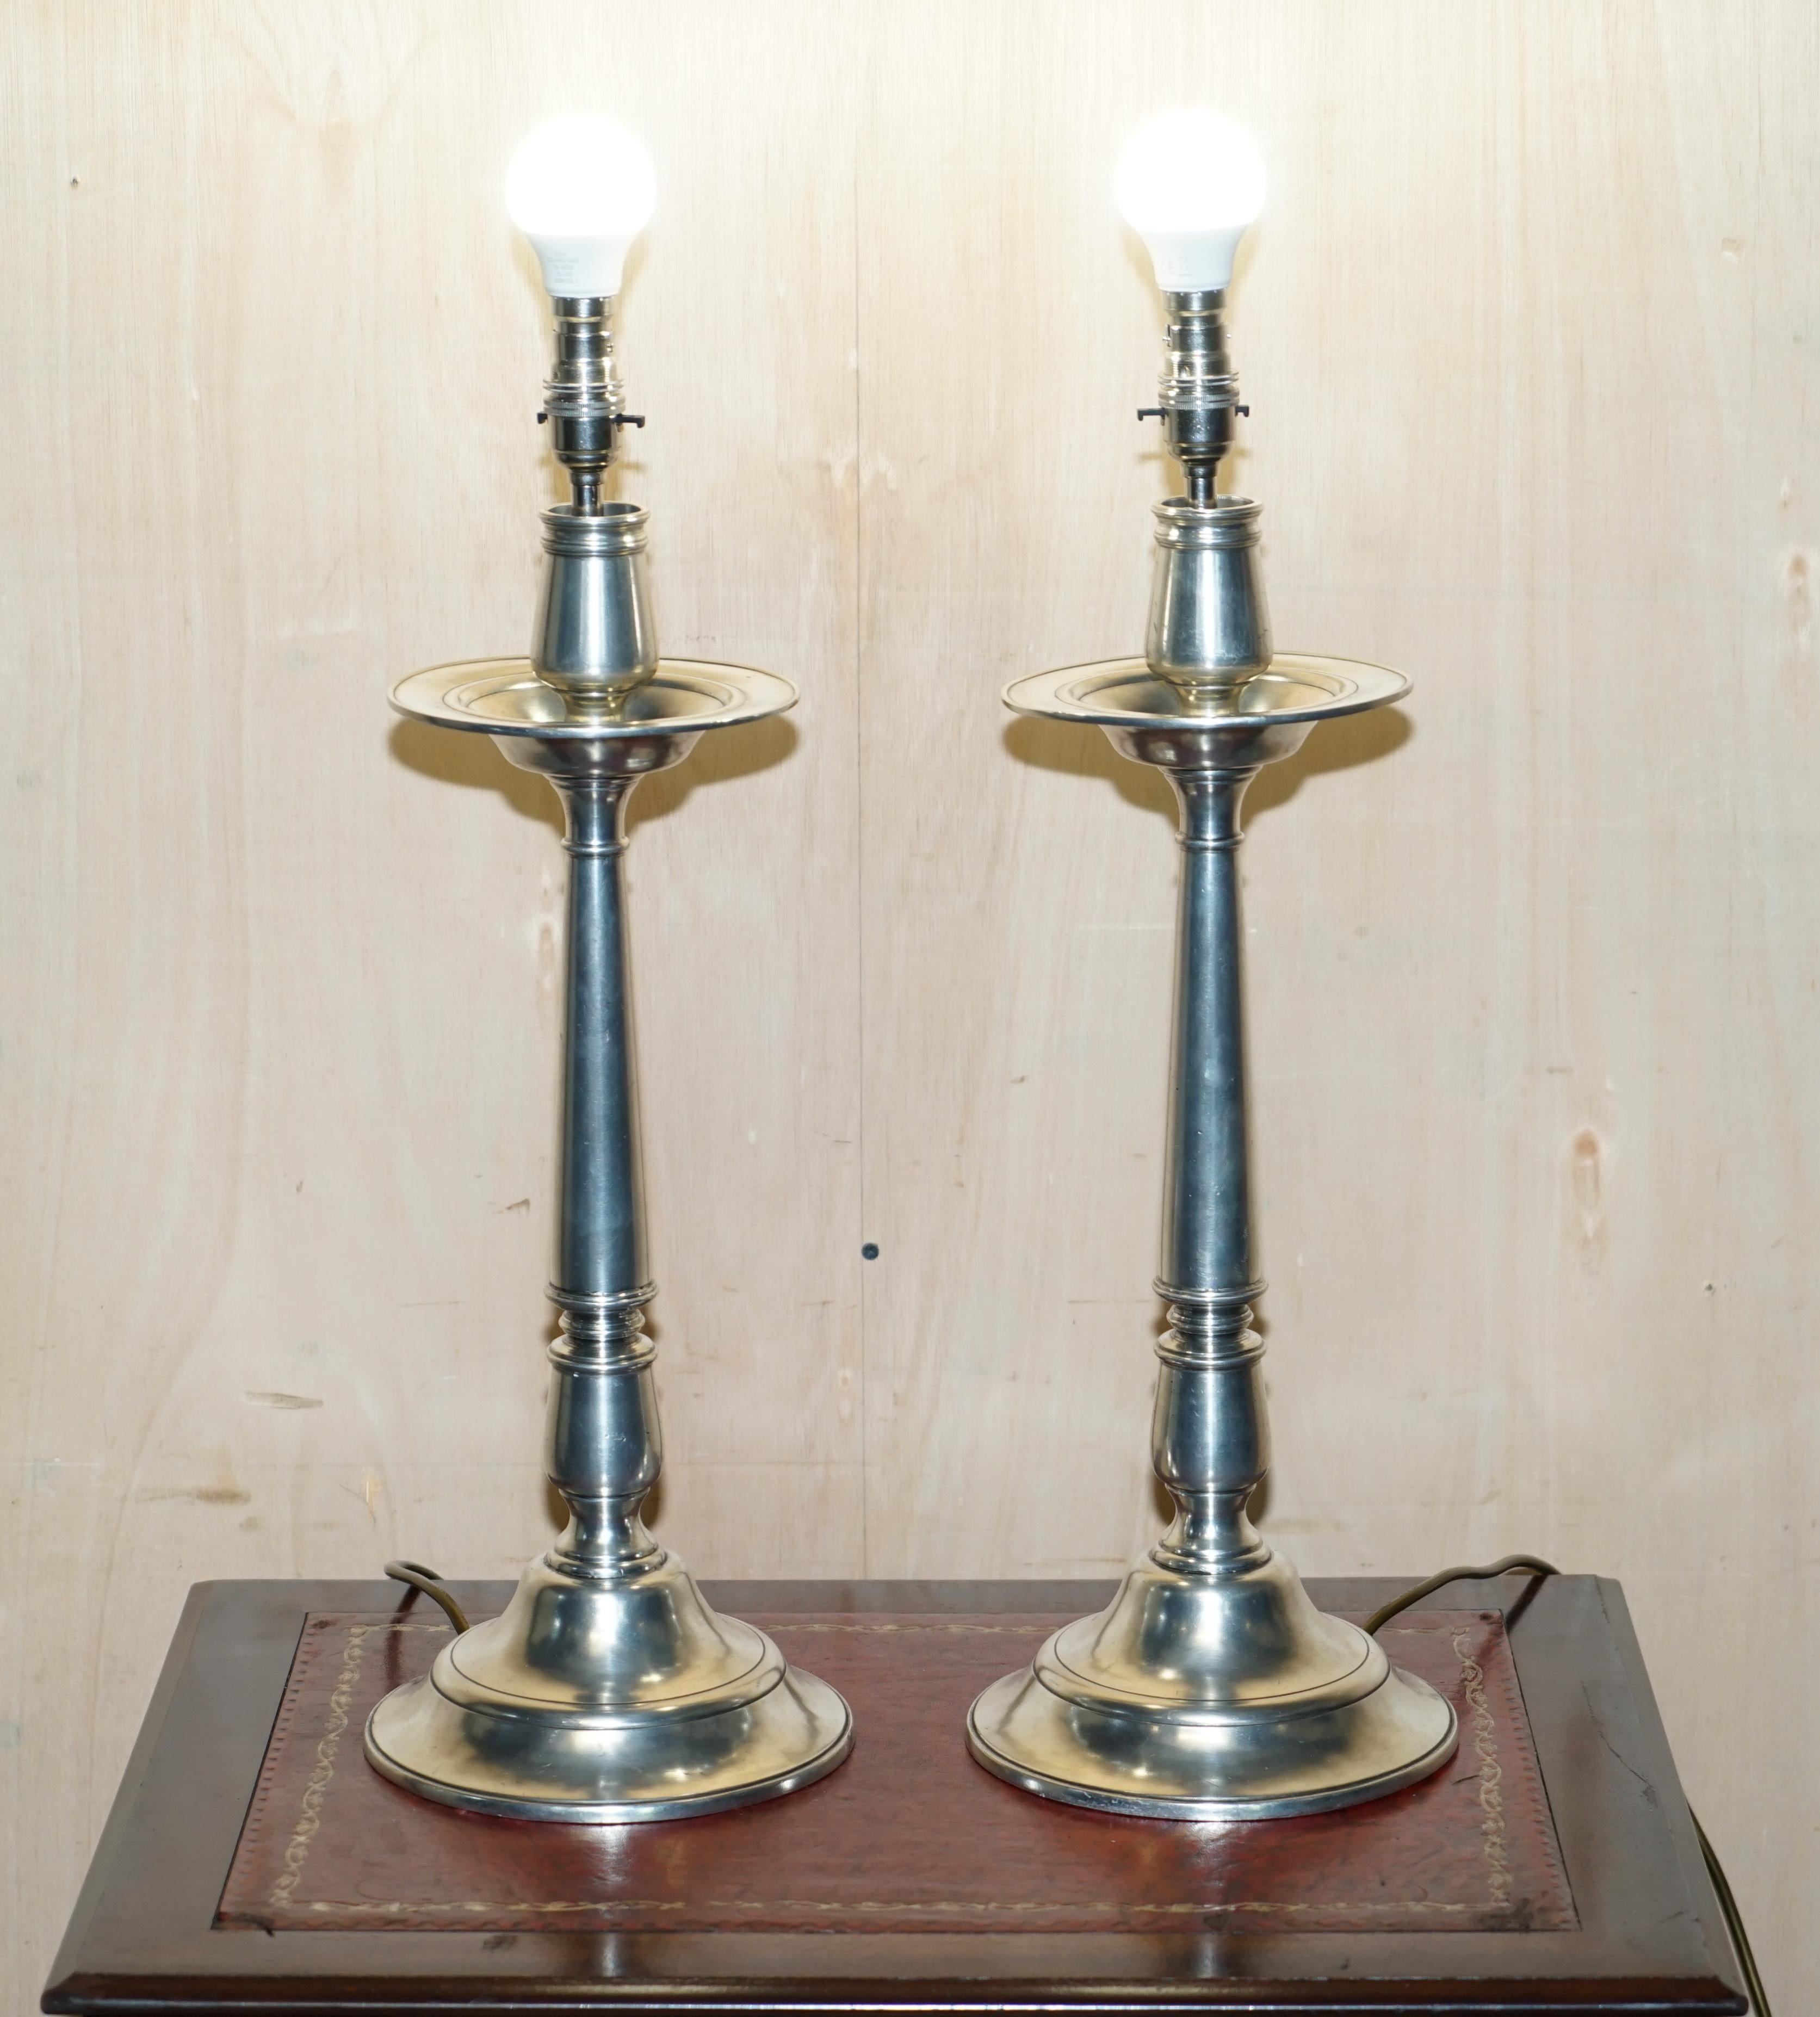 Royal House Antiques

Royal House Antiques is delighted to offer for sale this stunning pair of RRP £1950 large Arte Italica Tavola Marinoni candlestick table lamps which are part of a suite

I have a few variations of these lamps, there are two